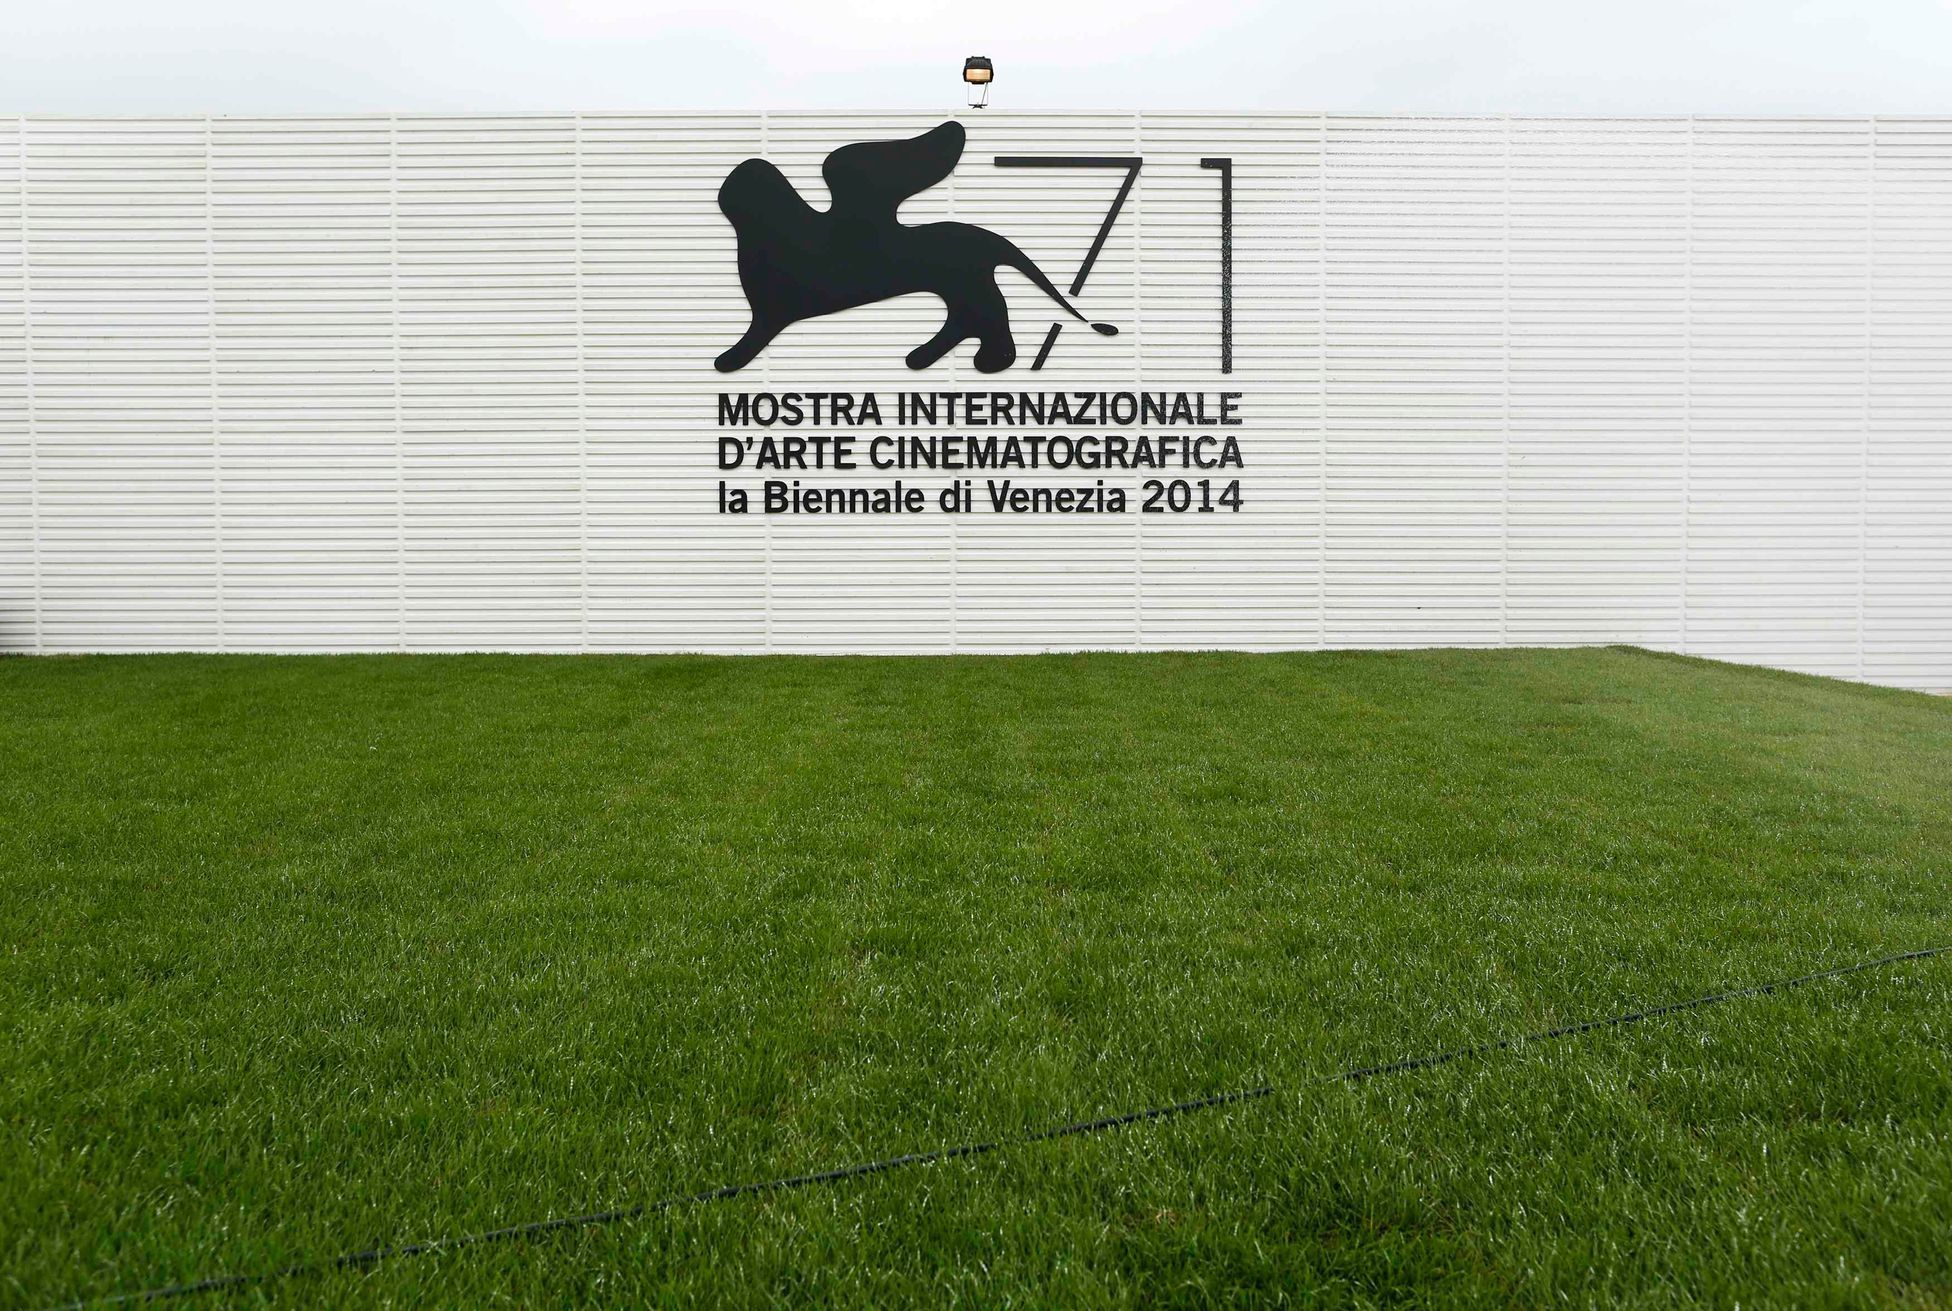 The logo of the 71st Venice Film Festival is seen on a wall in Venice